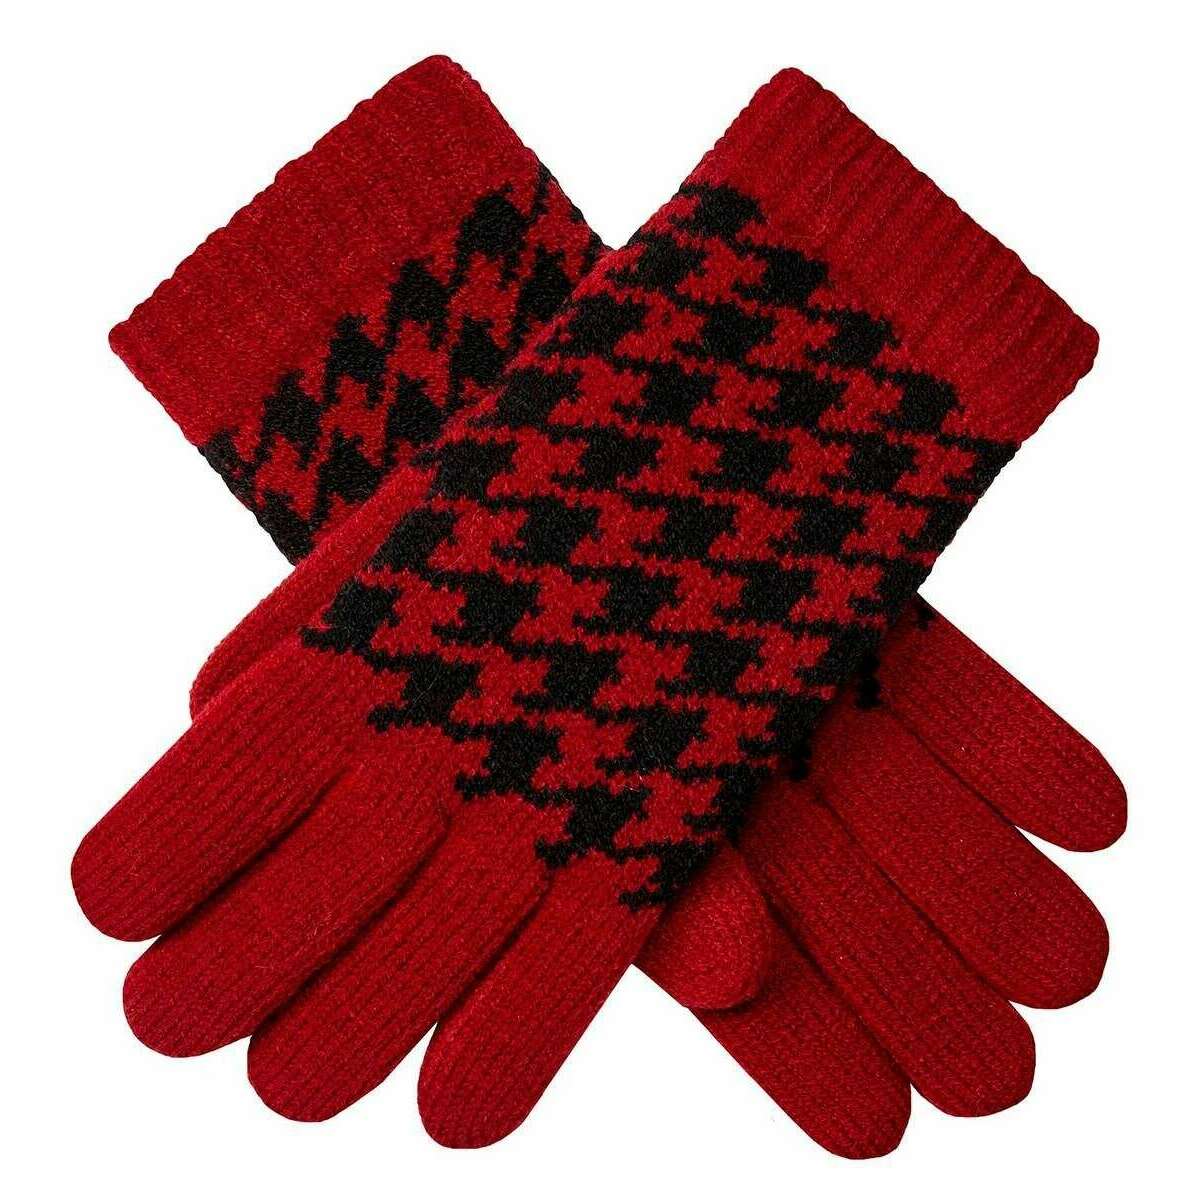 Dents Dogtooth Jacquard Knitted Gloves - Berry Red/Black